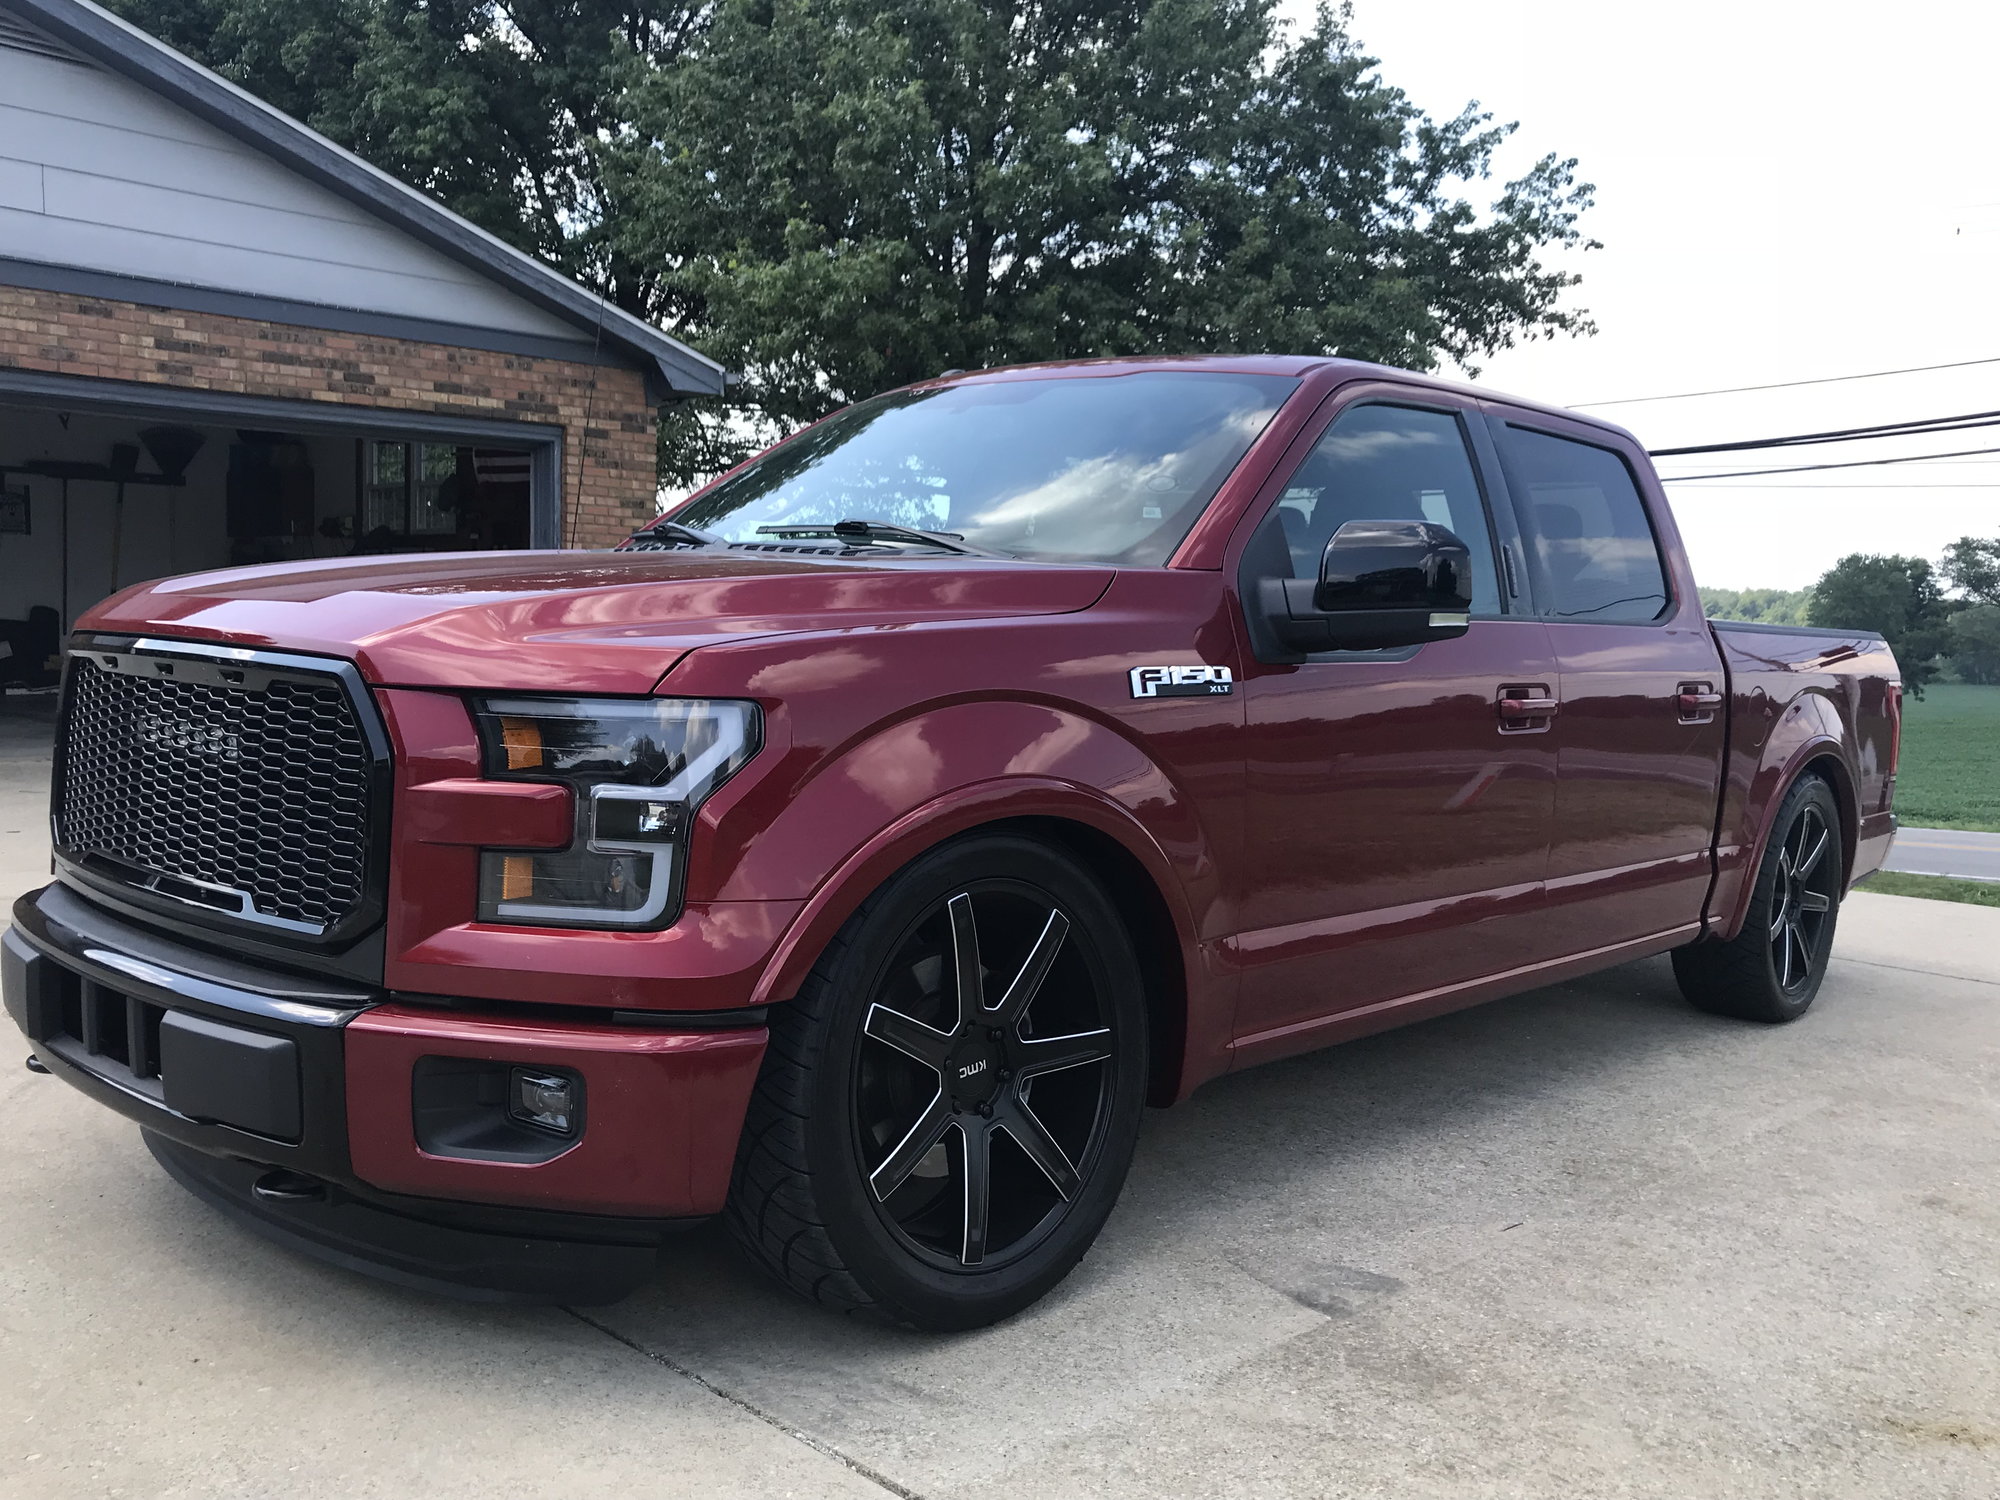 Belltech Shocks And 3 5 Crown Lowering Kit Ford F150 Forum Community Of Ford Truck Fans